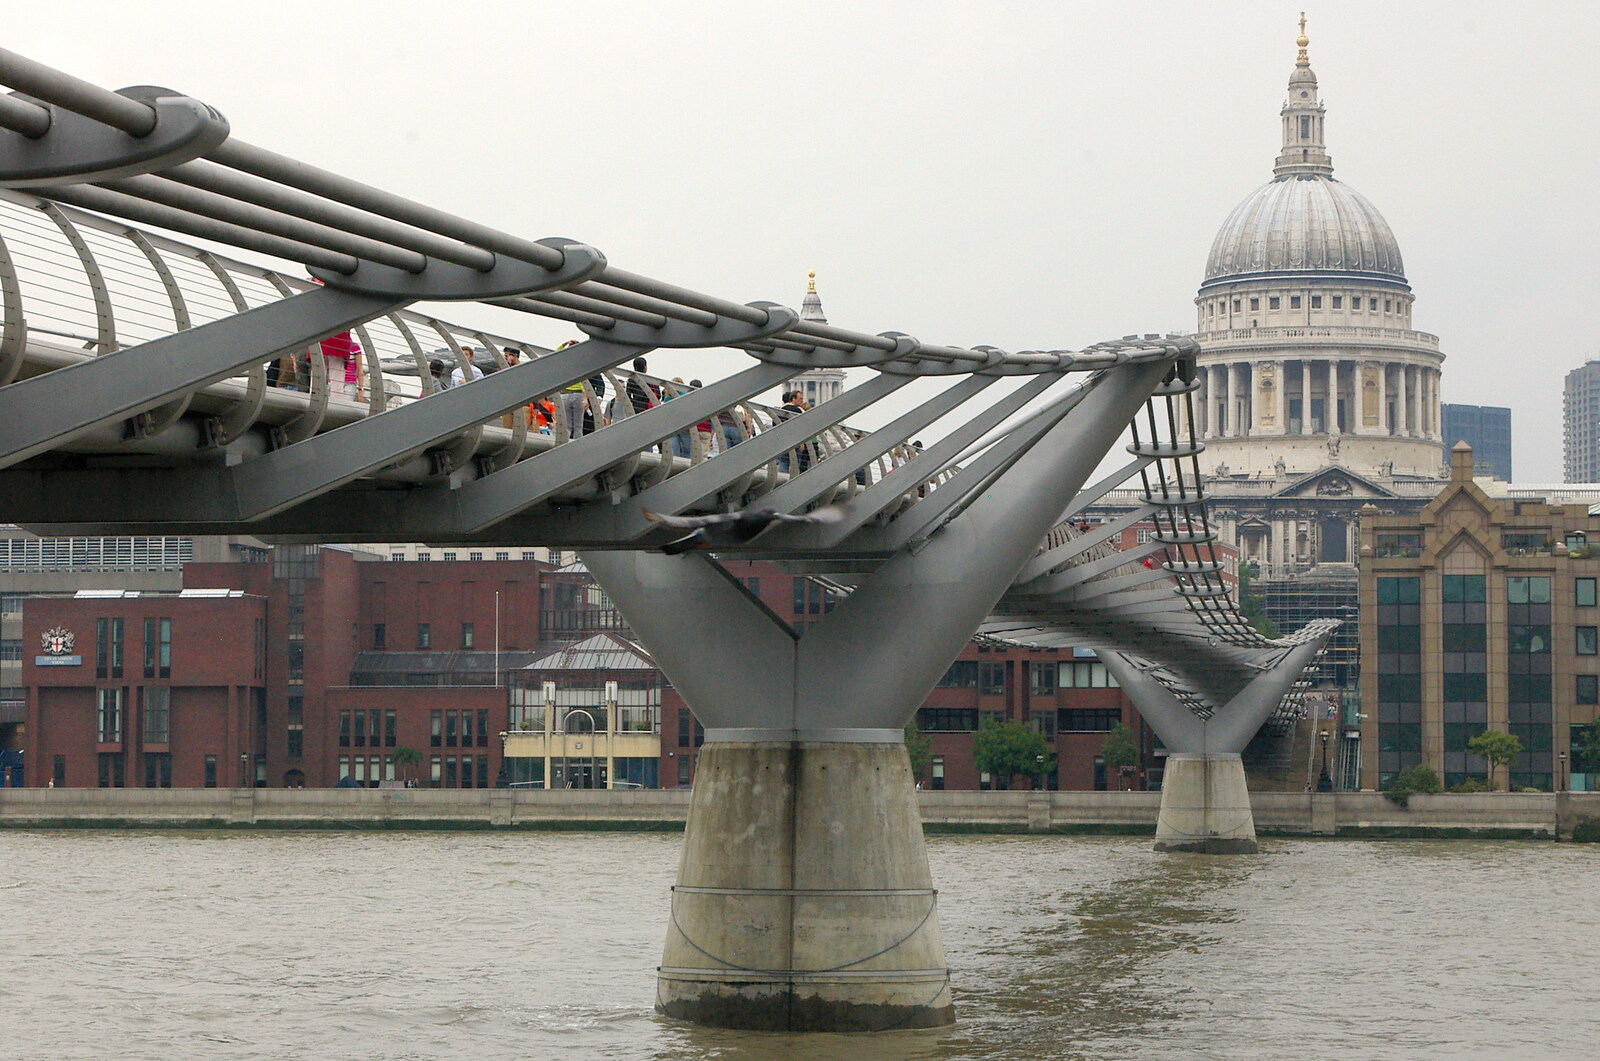 The Wobbly Bridge from Borough Market and North Clapham Tapas, London - 23rd July 2005